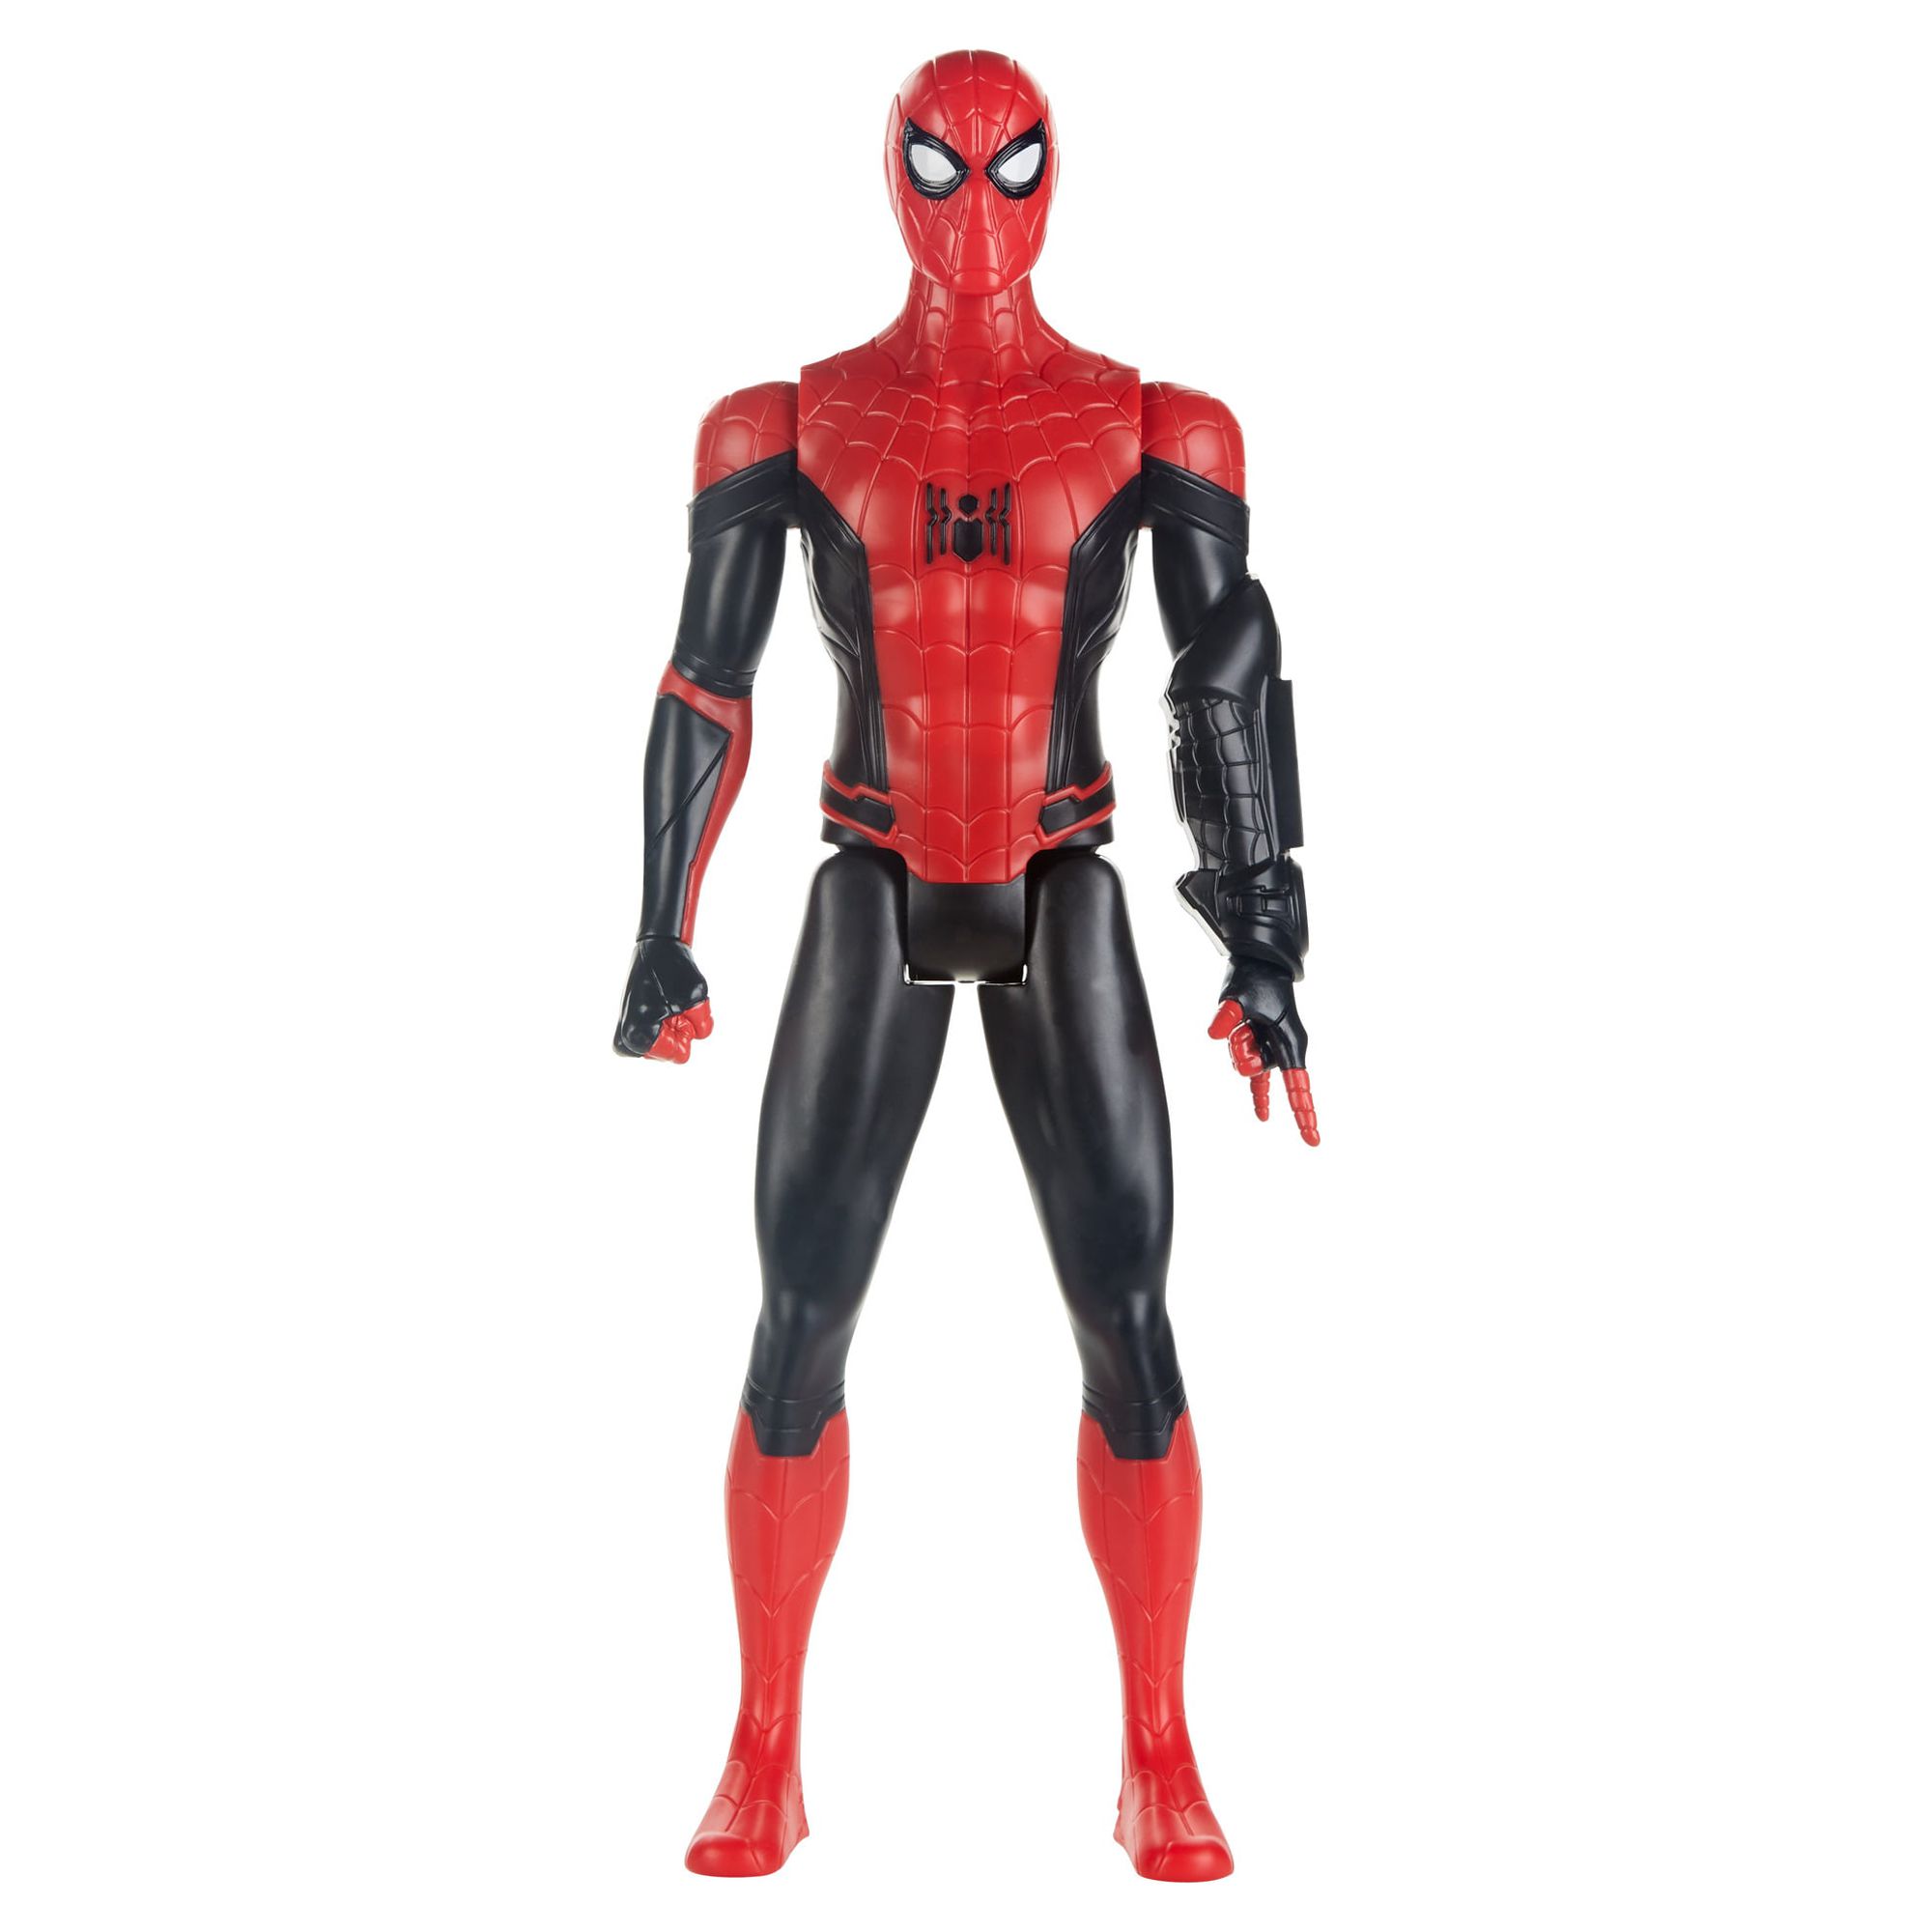 Spider-Man Far from Home Titan Hero Series Figure - image 5 of 7